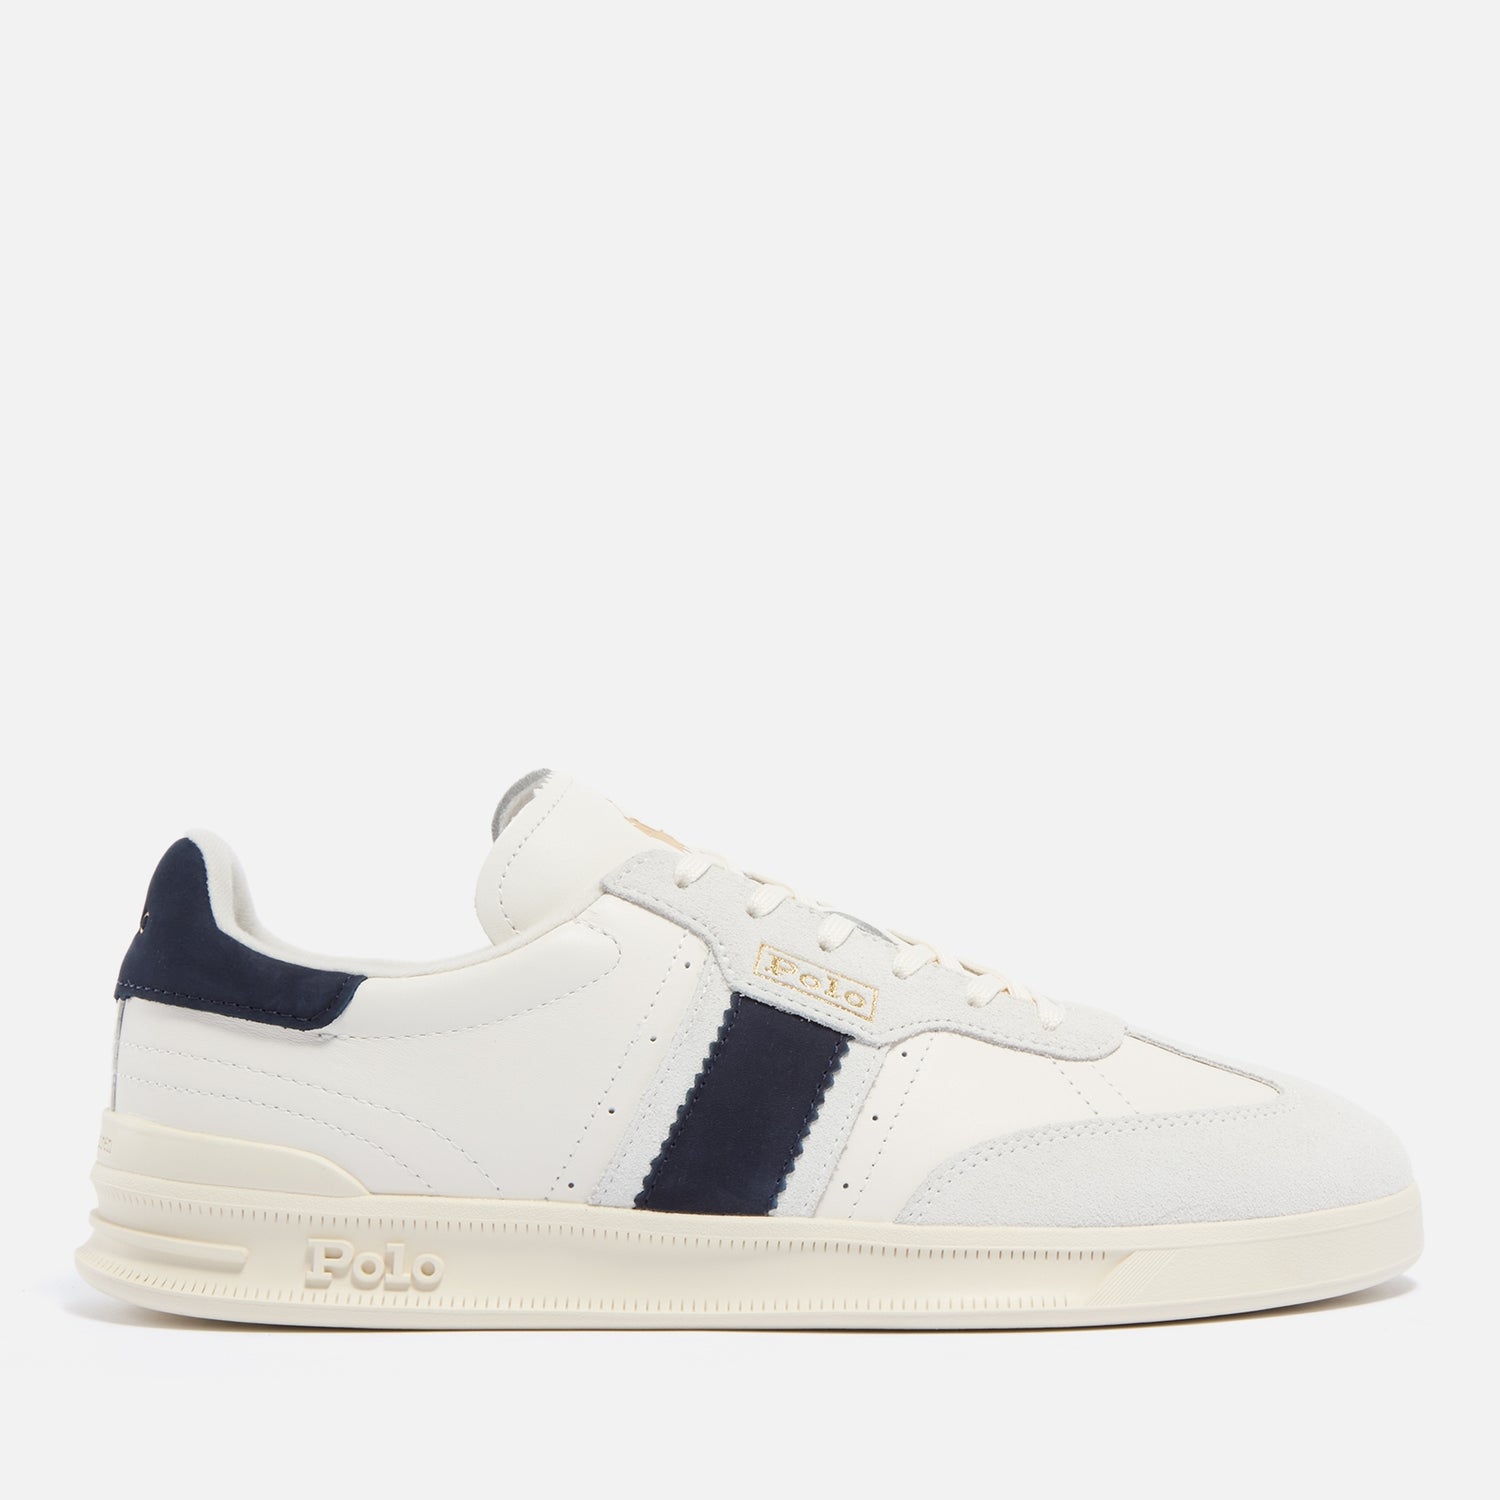 Polo Ralph Lauren Men's Heritage Area Leather and Suede Trainers - UK 7